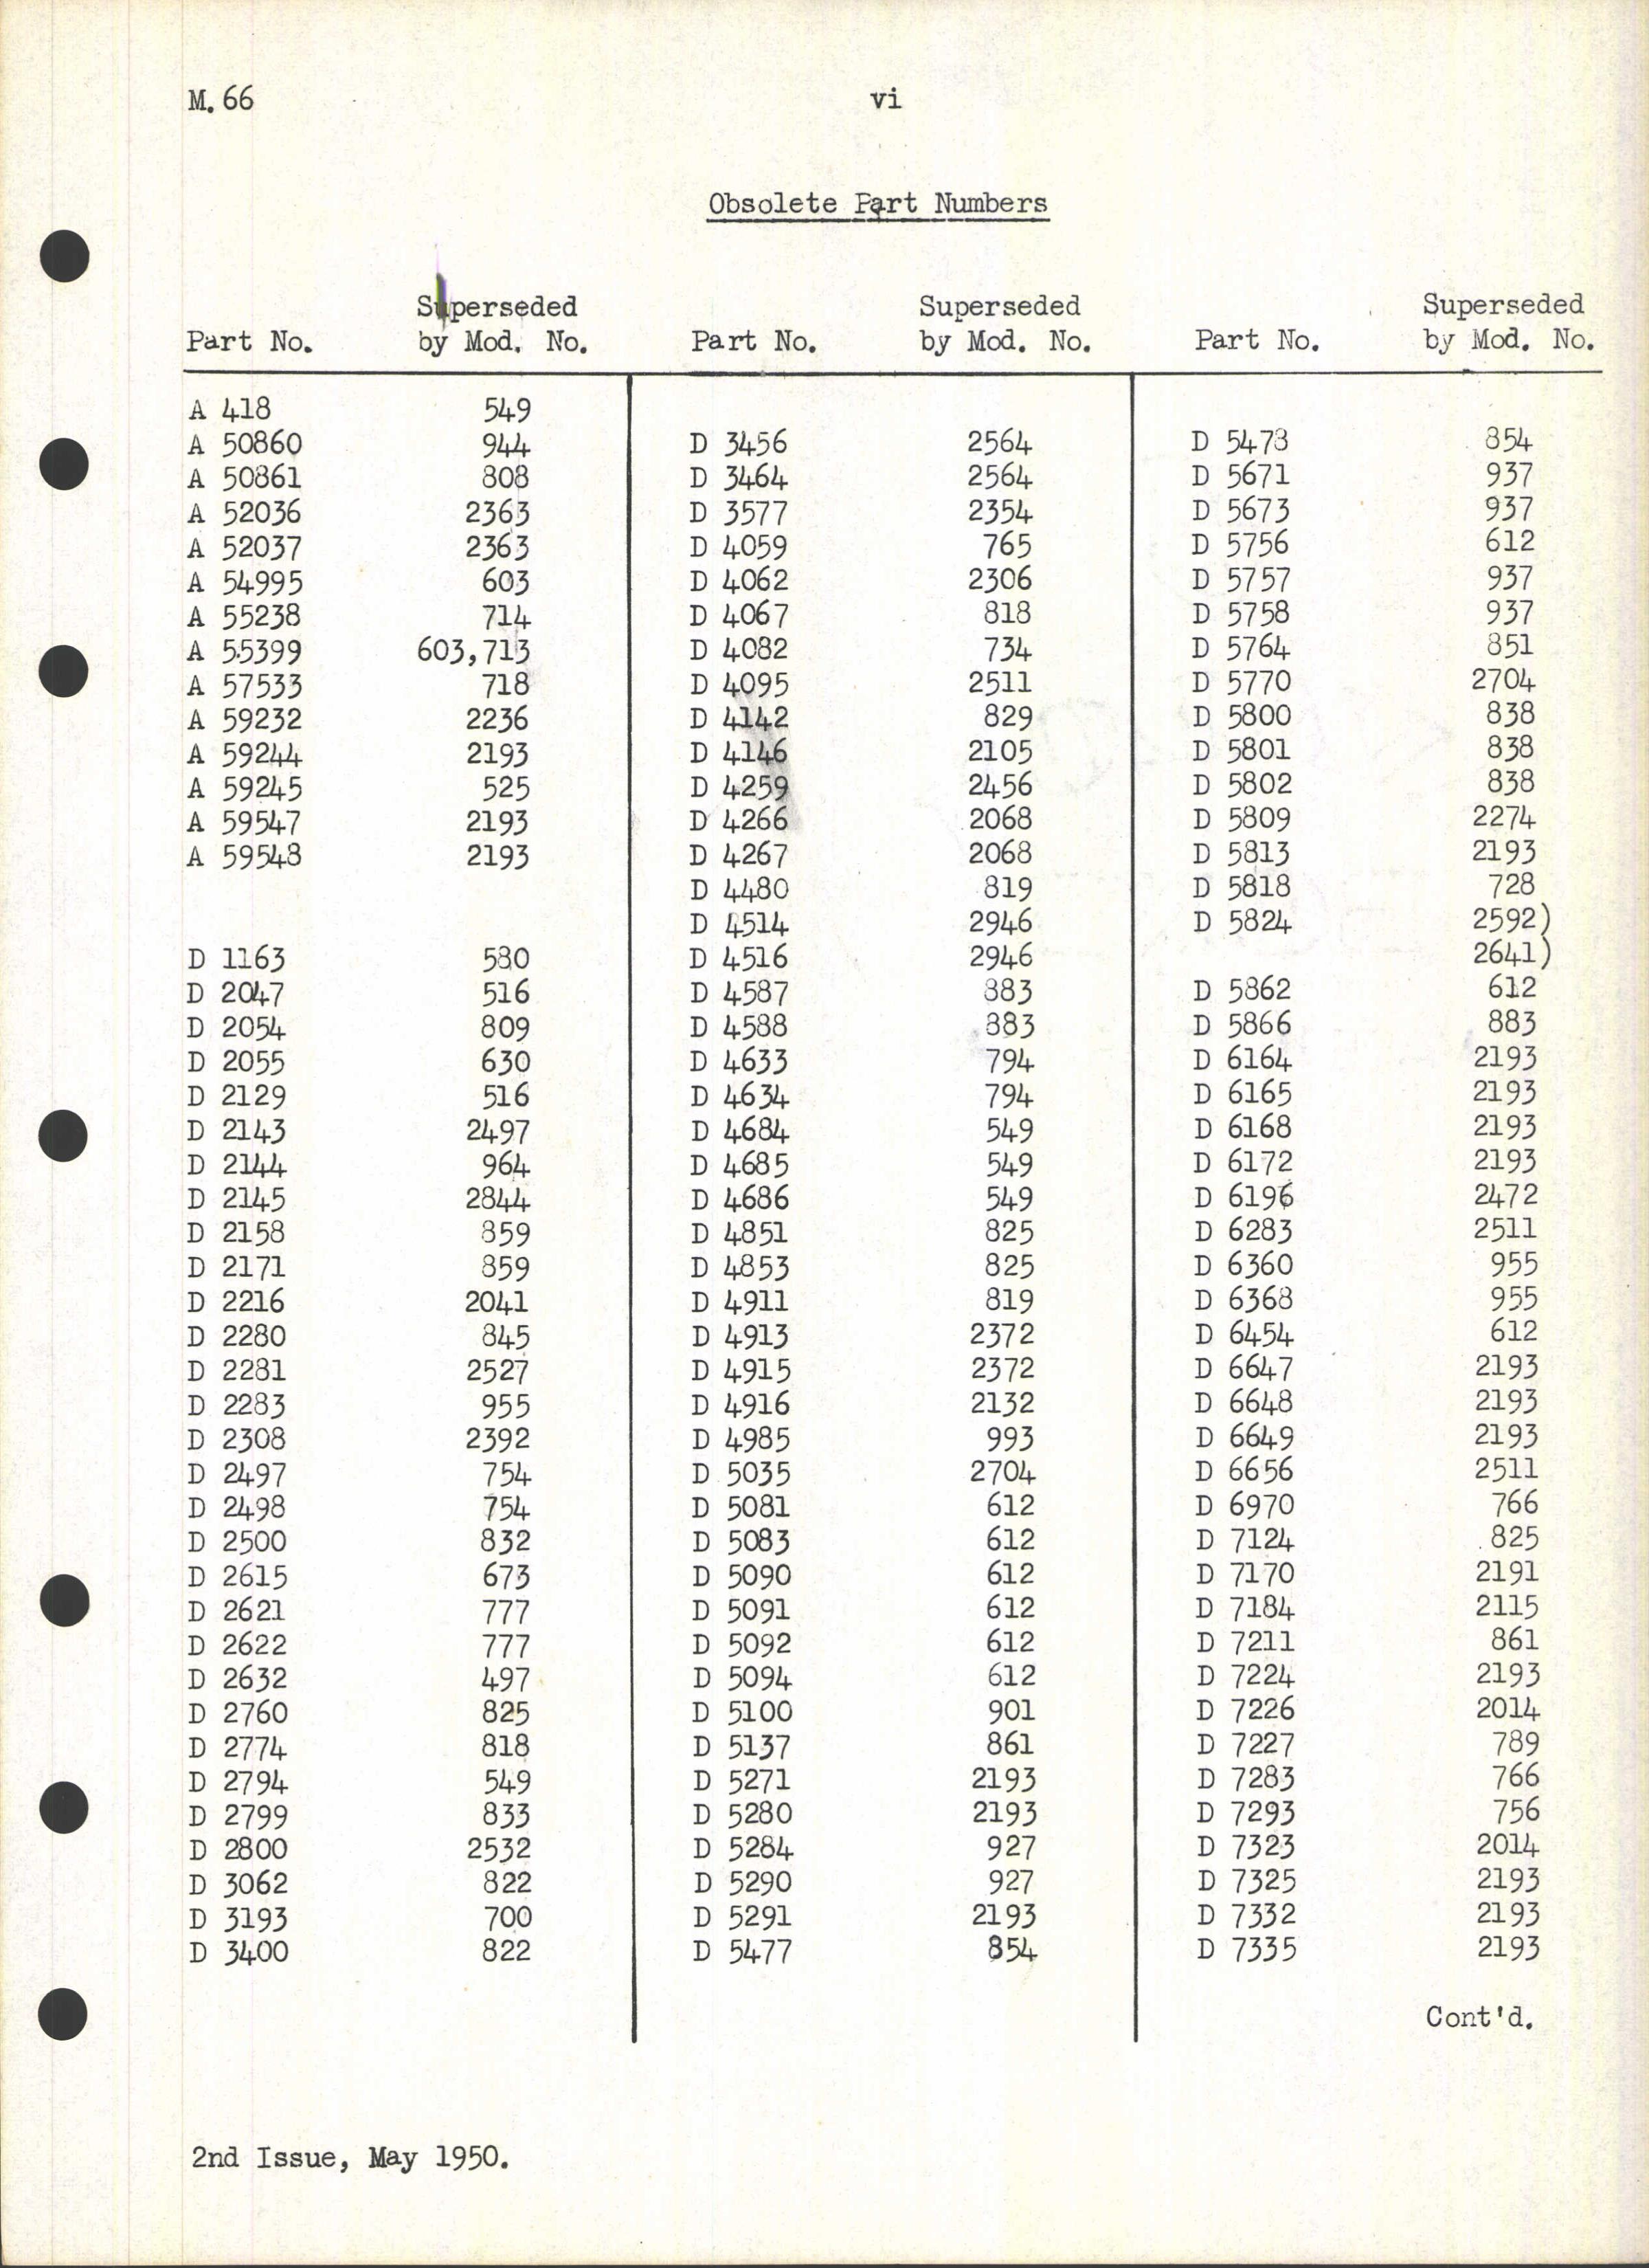 Sample page 17 from AirCorps Library document: Schedule of Engine Spare Parts for Merlin 66 and 70